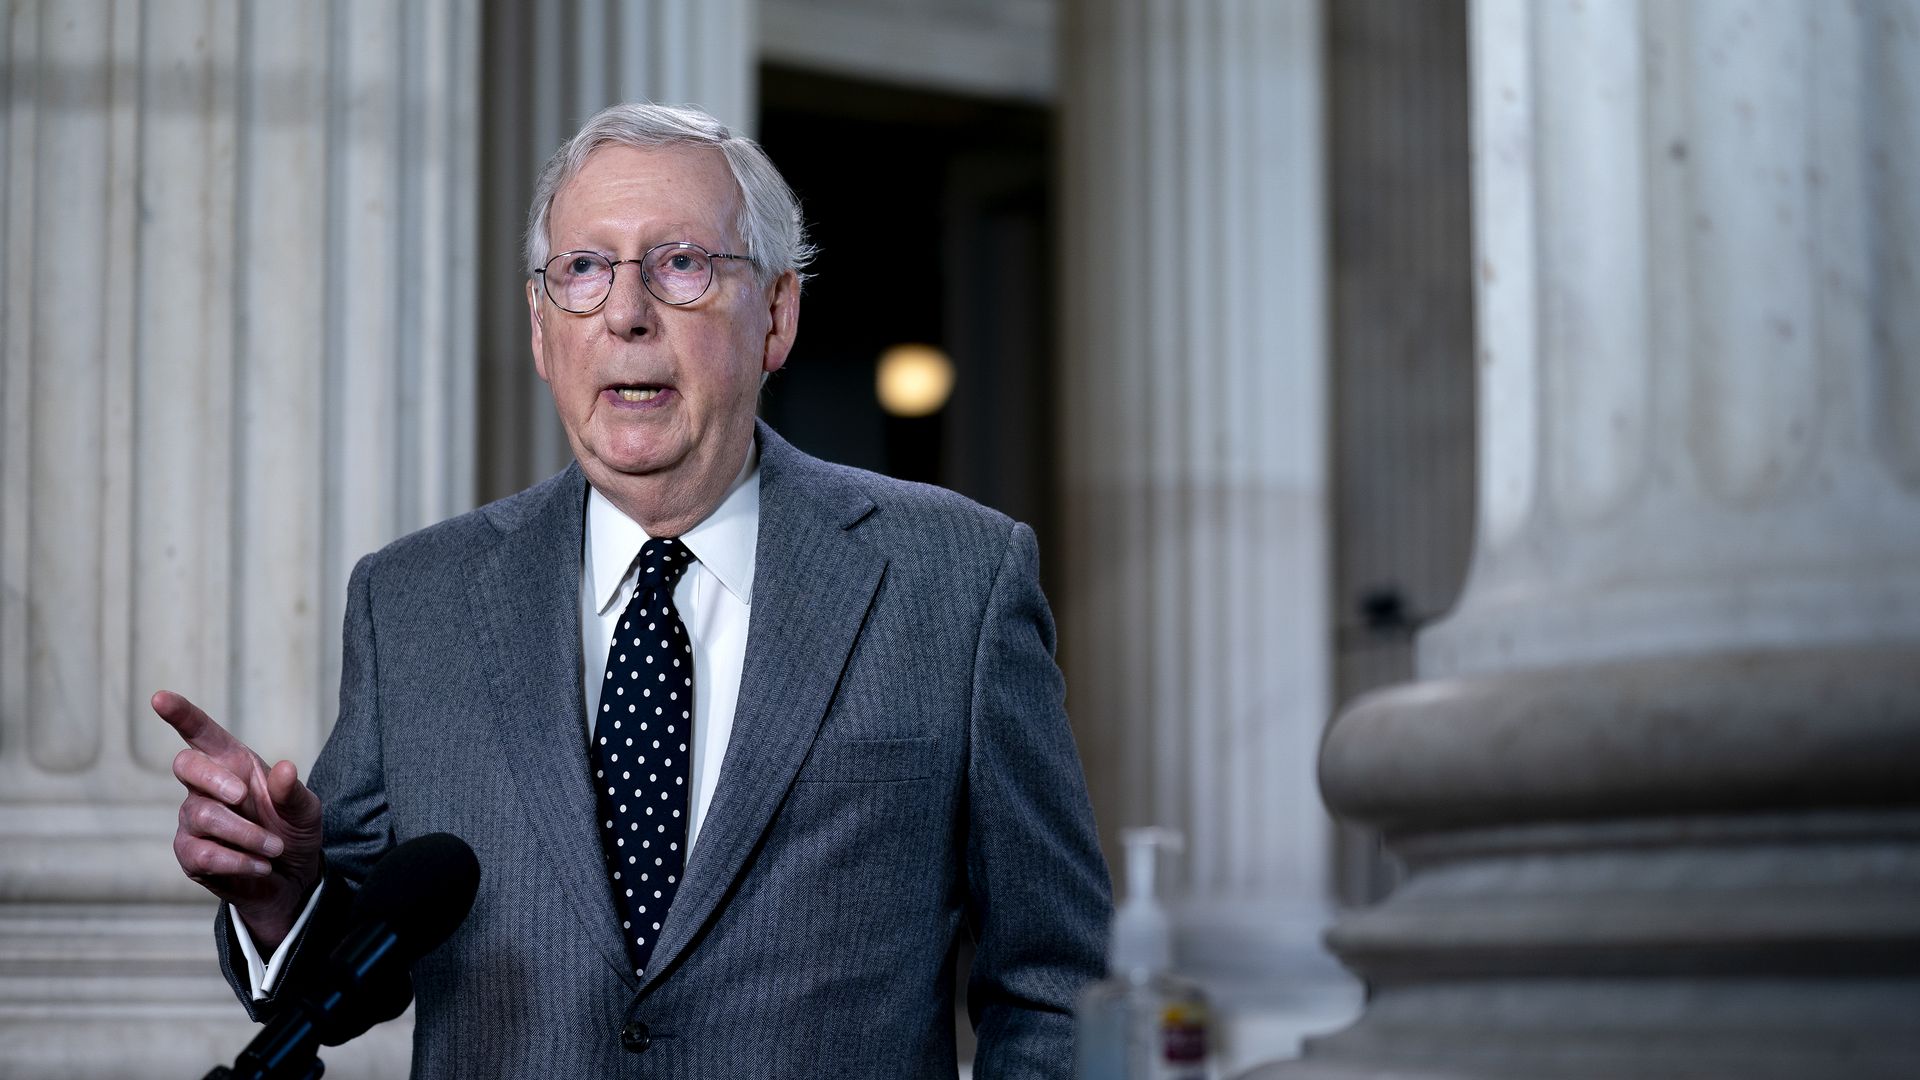 Photo of Mitch McConnell speaking during a television interview with one hand raised